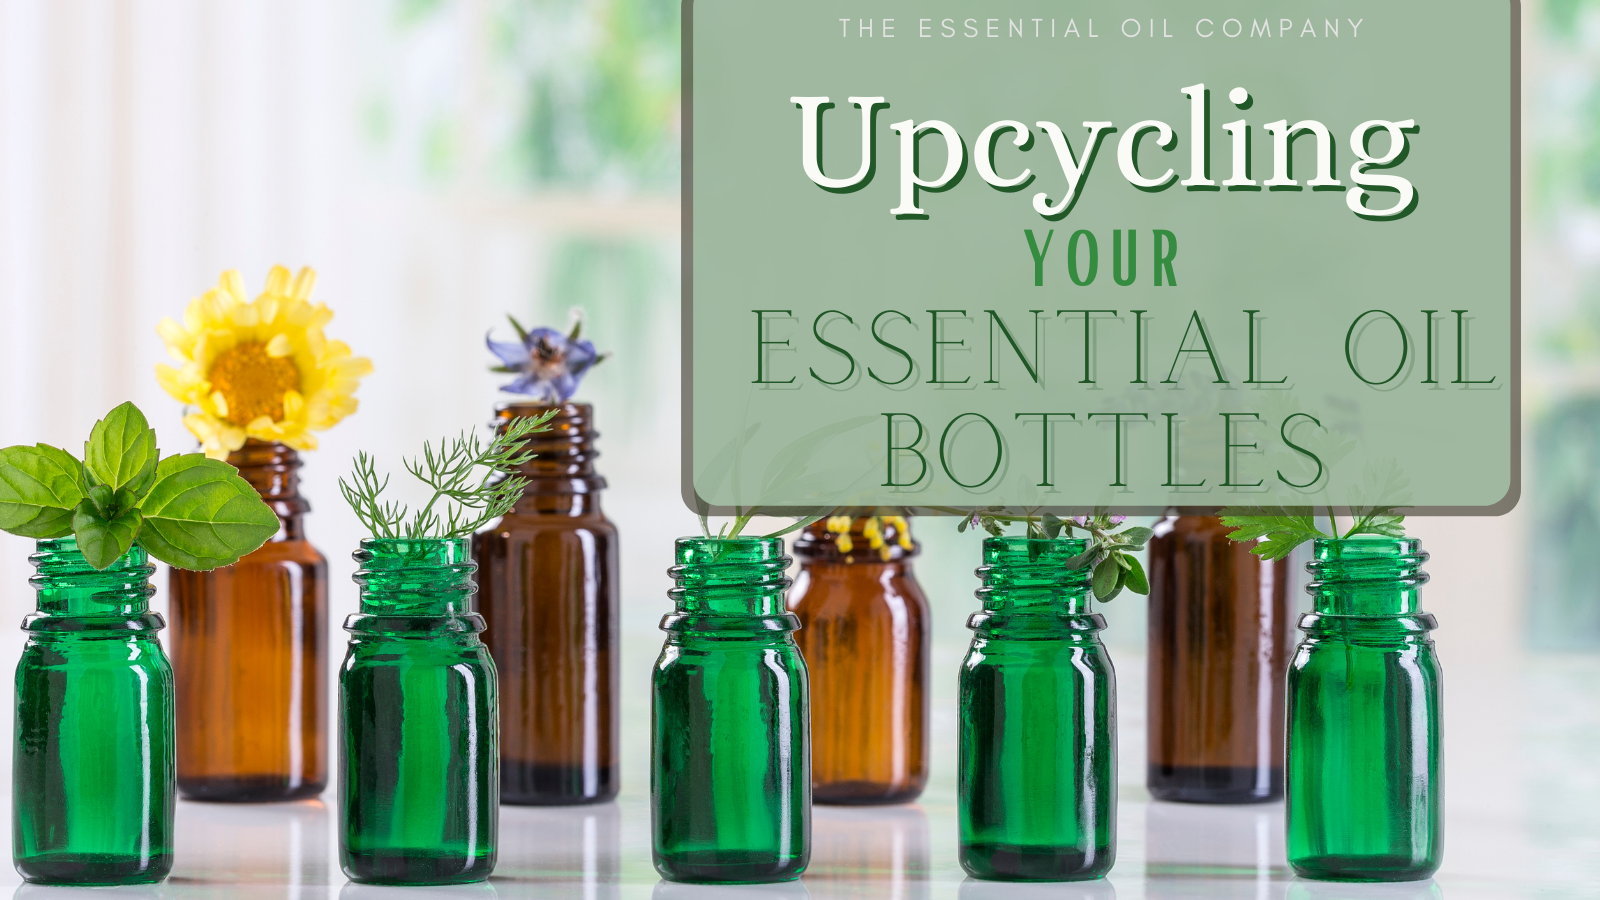 Upcycling your essential oil bottles